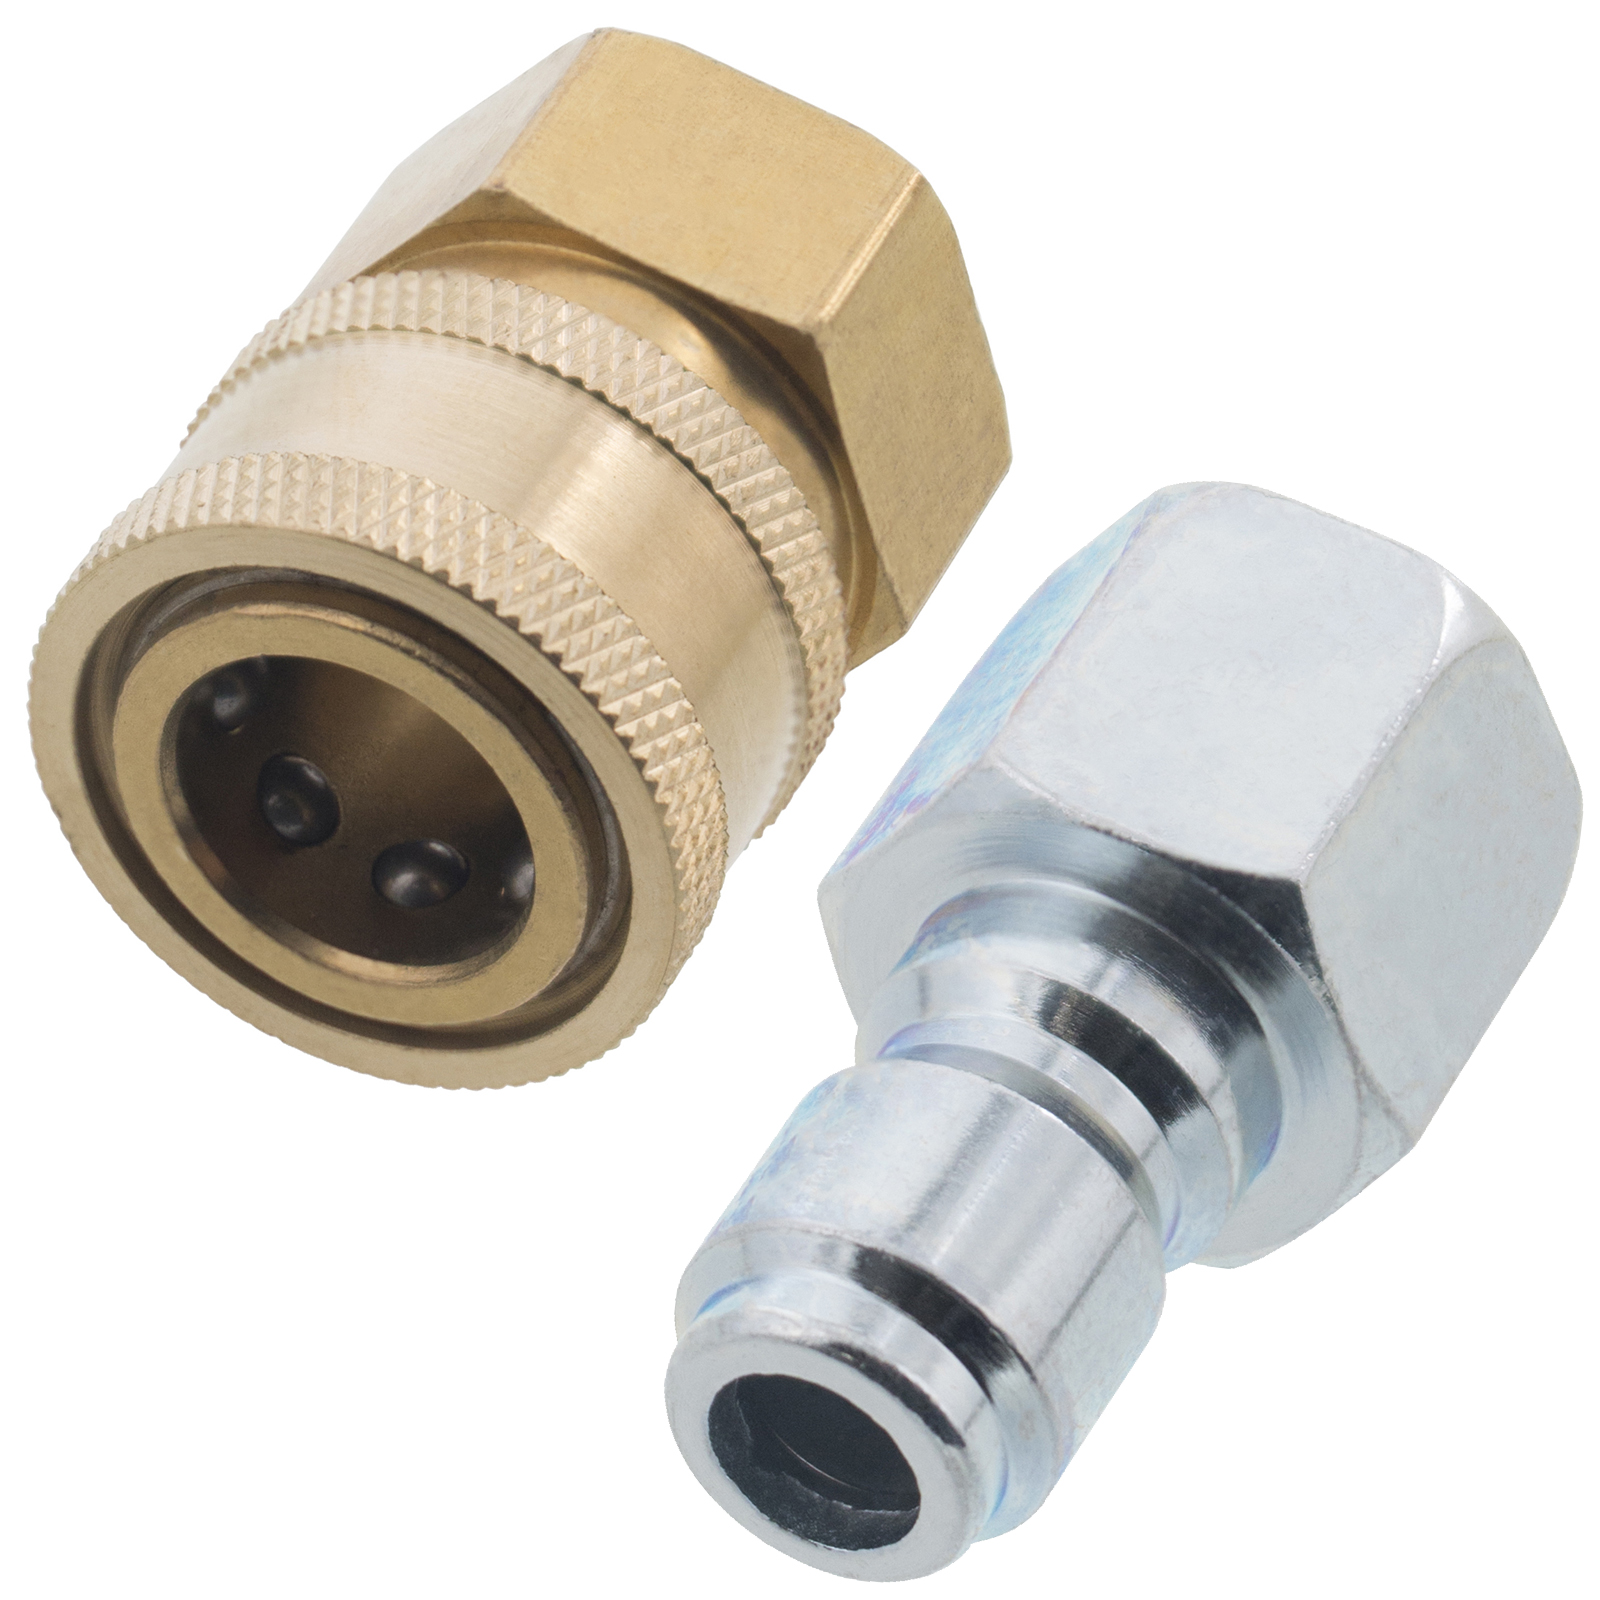 Pressure Washer Twist Type Quick Connector Coupler 22mm Female X 3/8" NPT Male